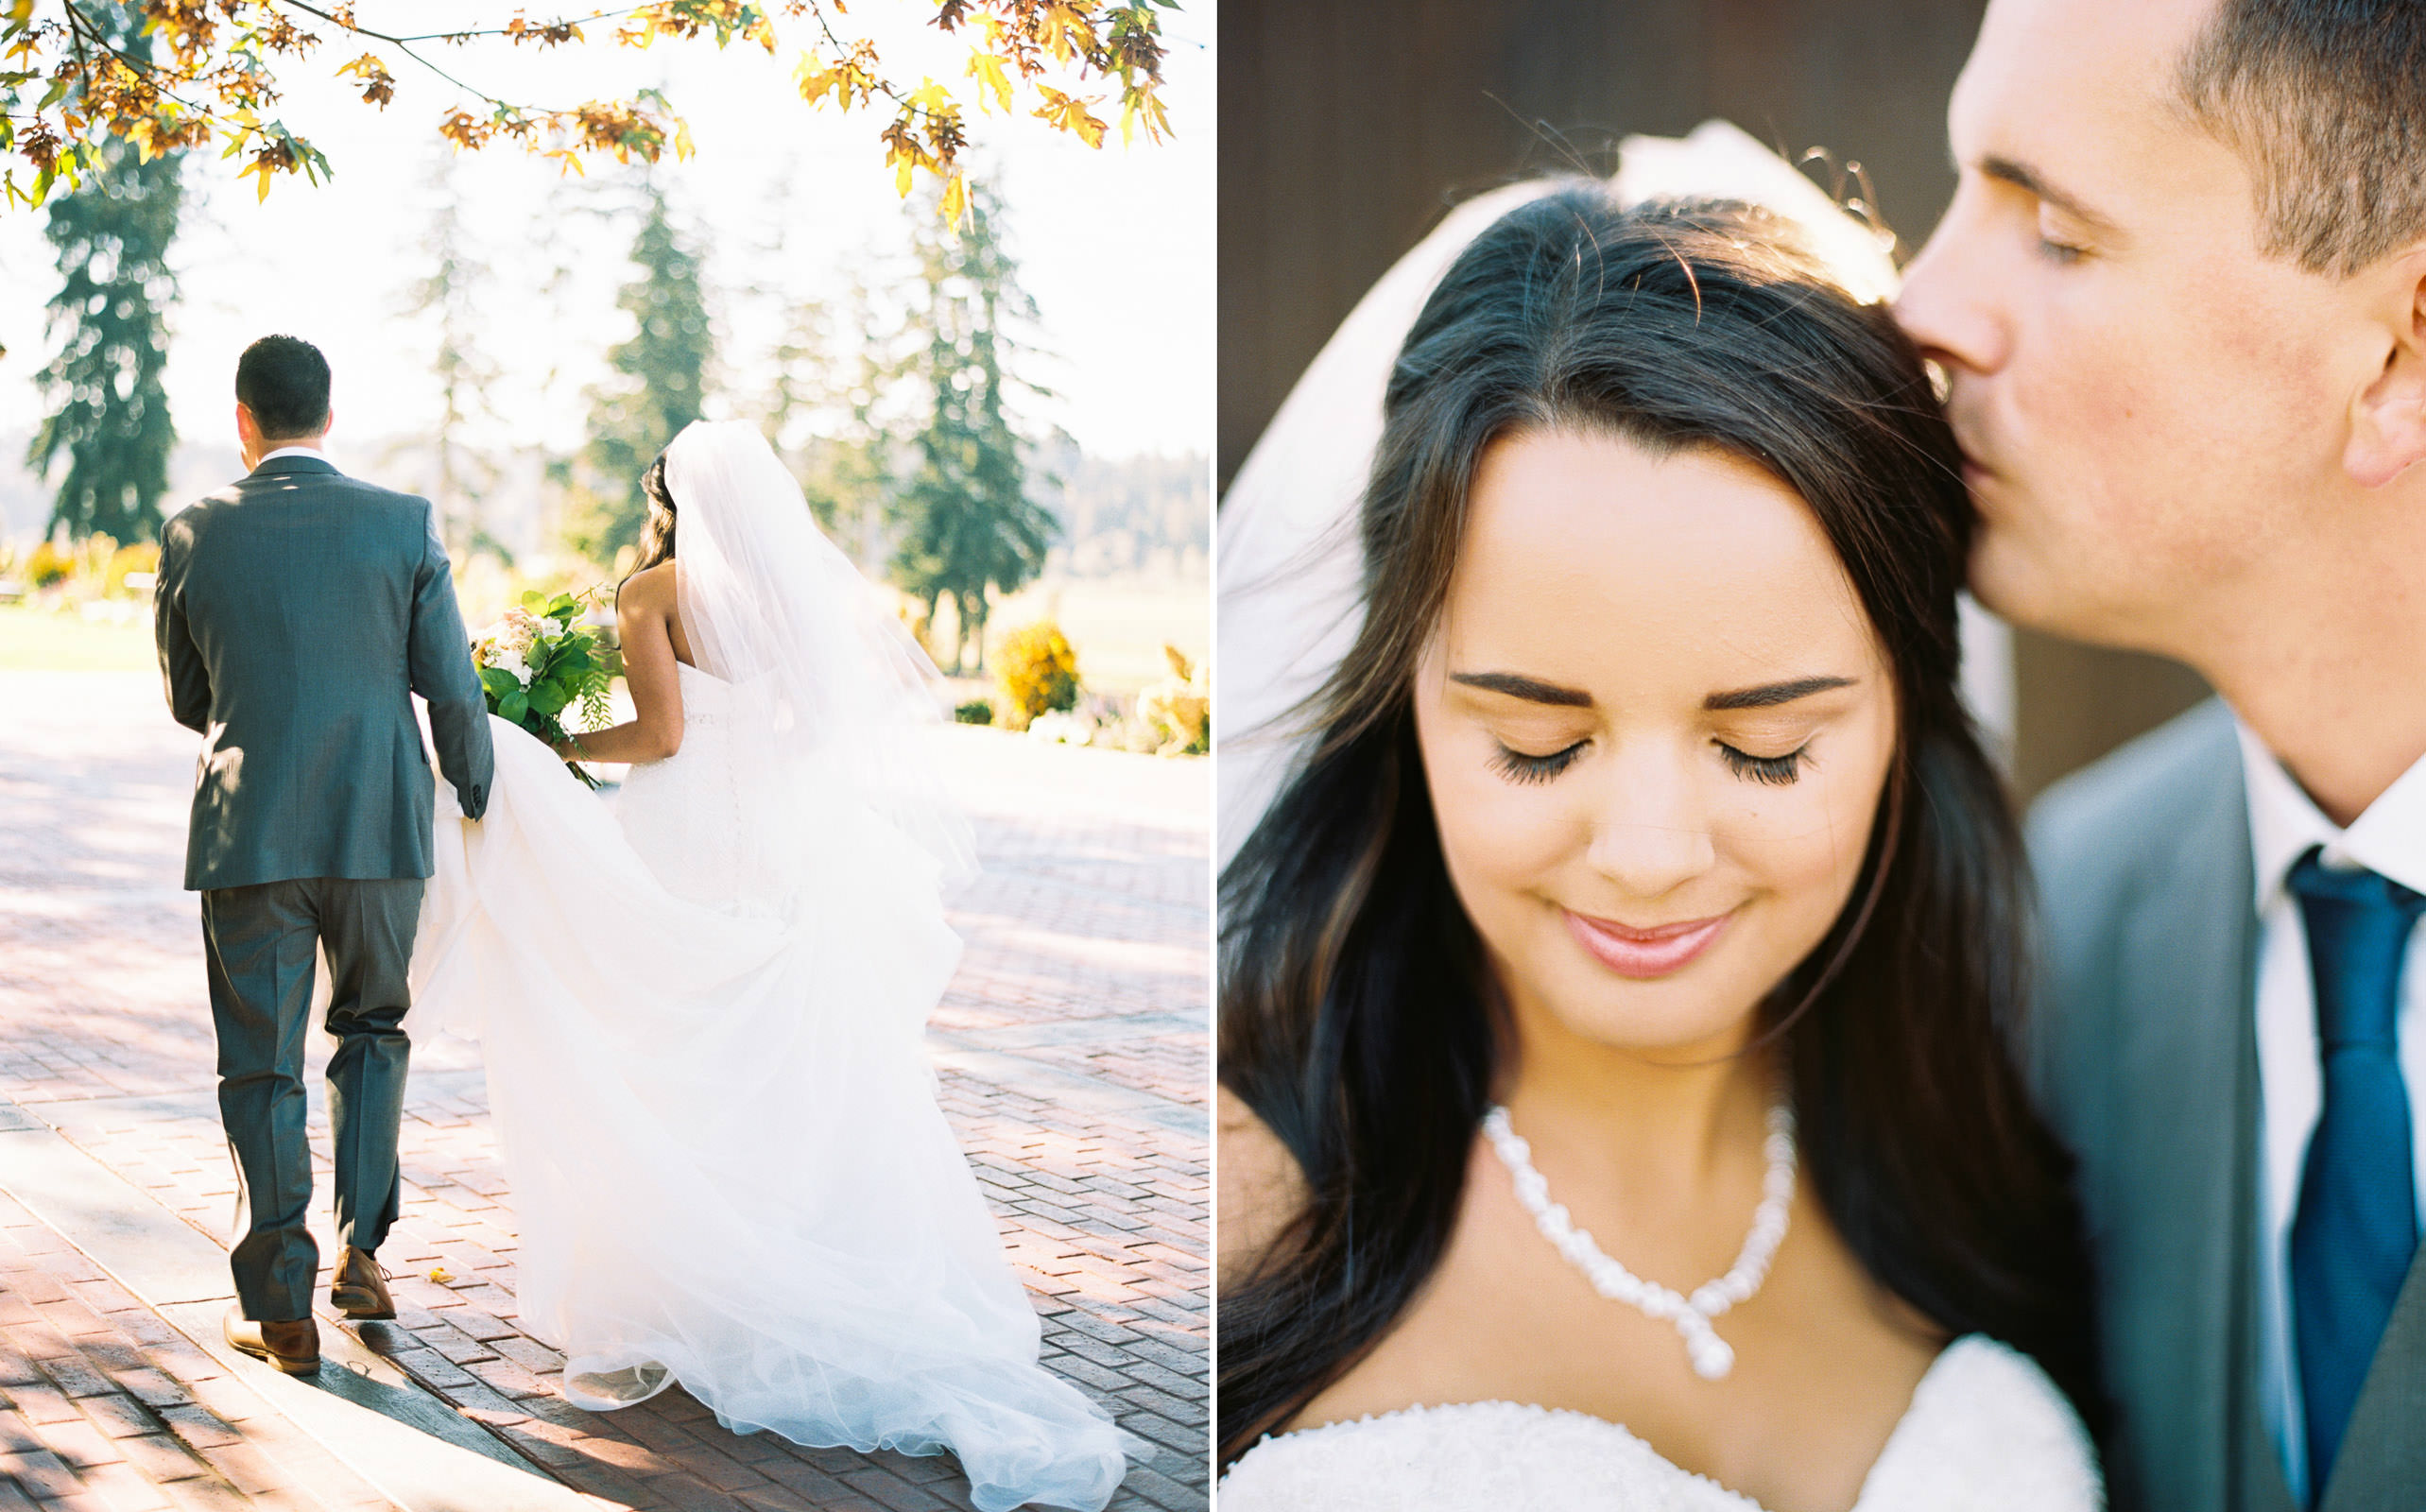 Elegant Bride and Groom portraits at a Fall Kelley Farms Wedding | Seattle Wedding Photographer Anna Peters